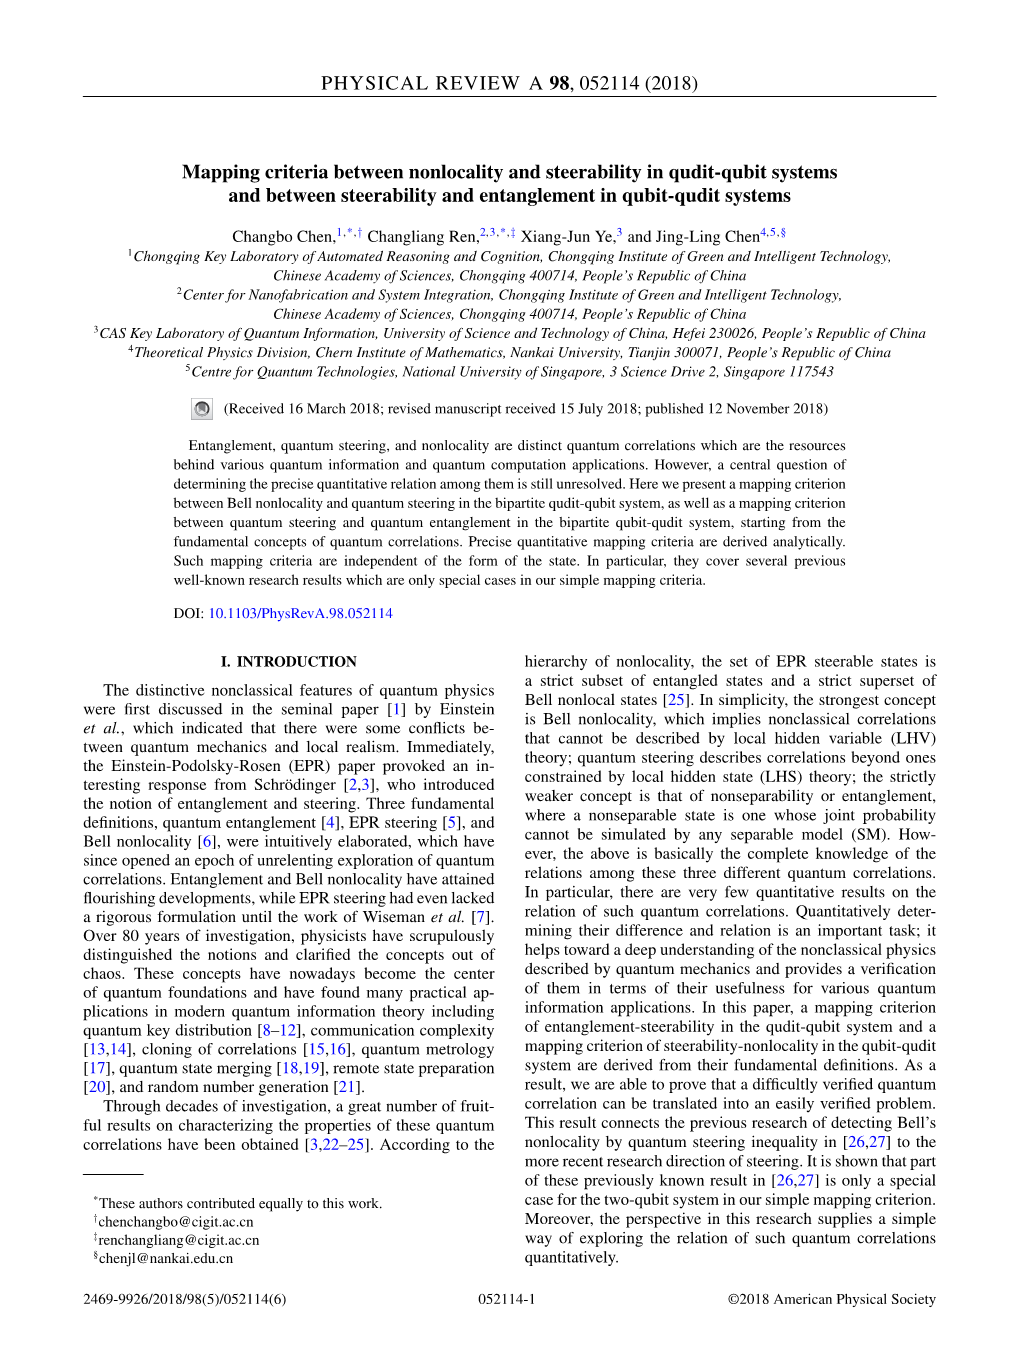 Mapping Criteria Between Nonlocality and Steerability in Qudit-Qubit Systems and Between Steerability and Entanglement in Qubit-Qudit Systems